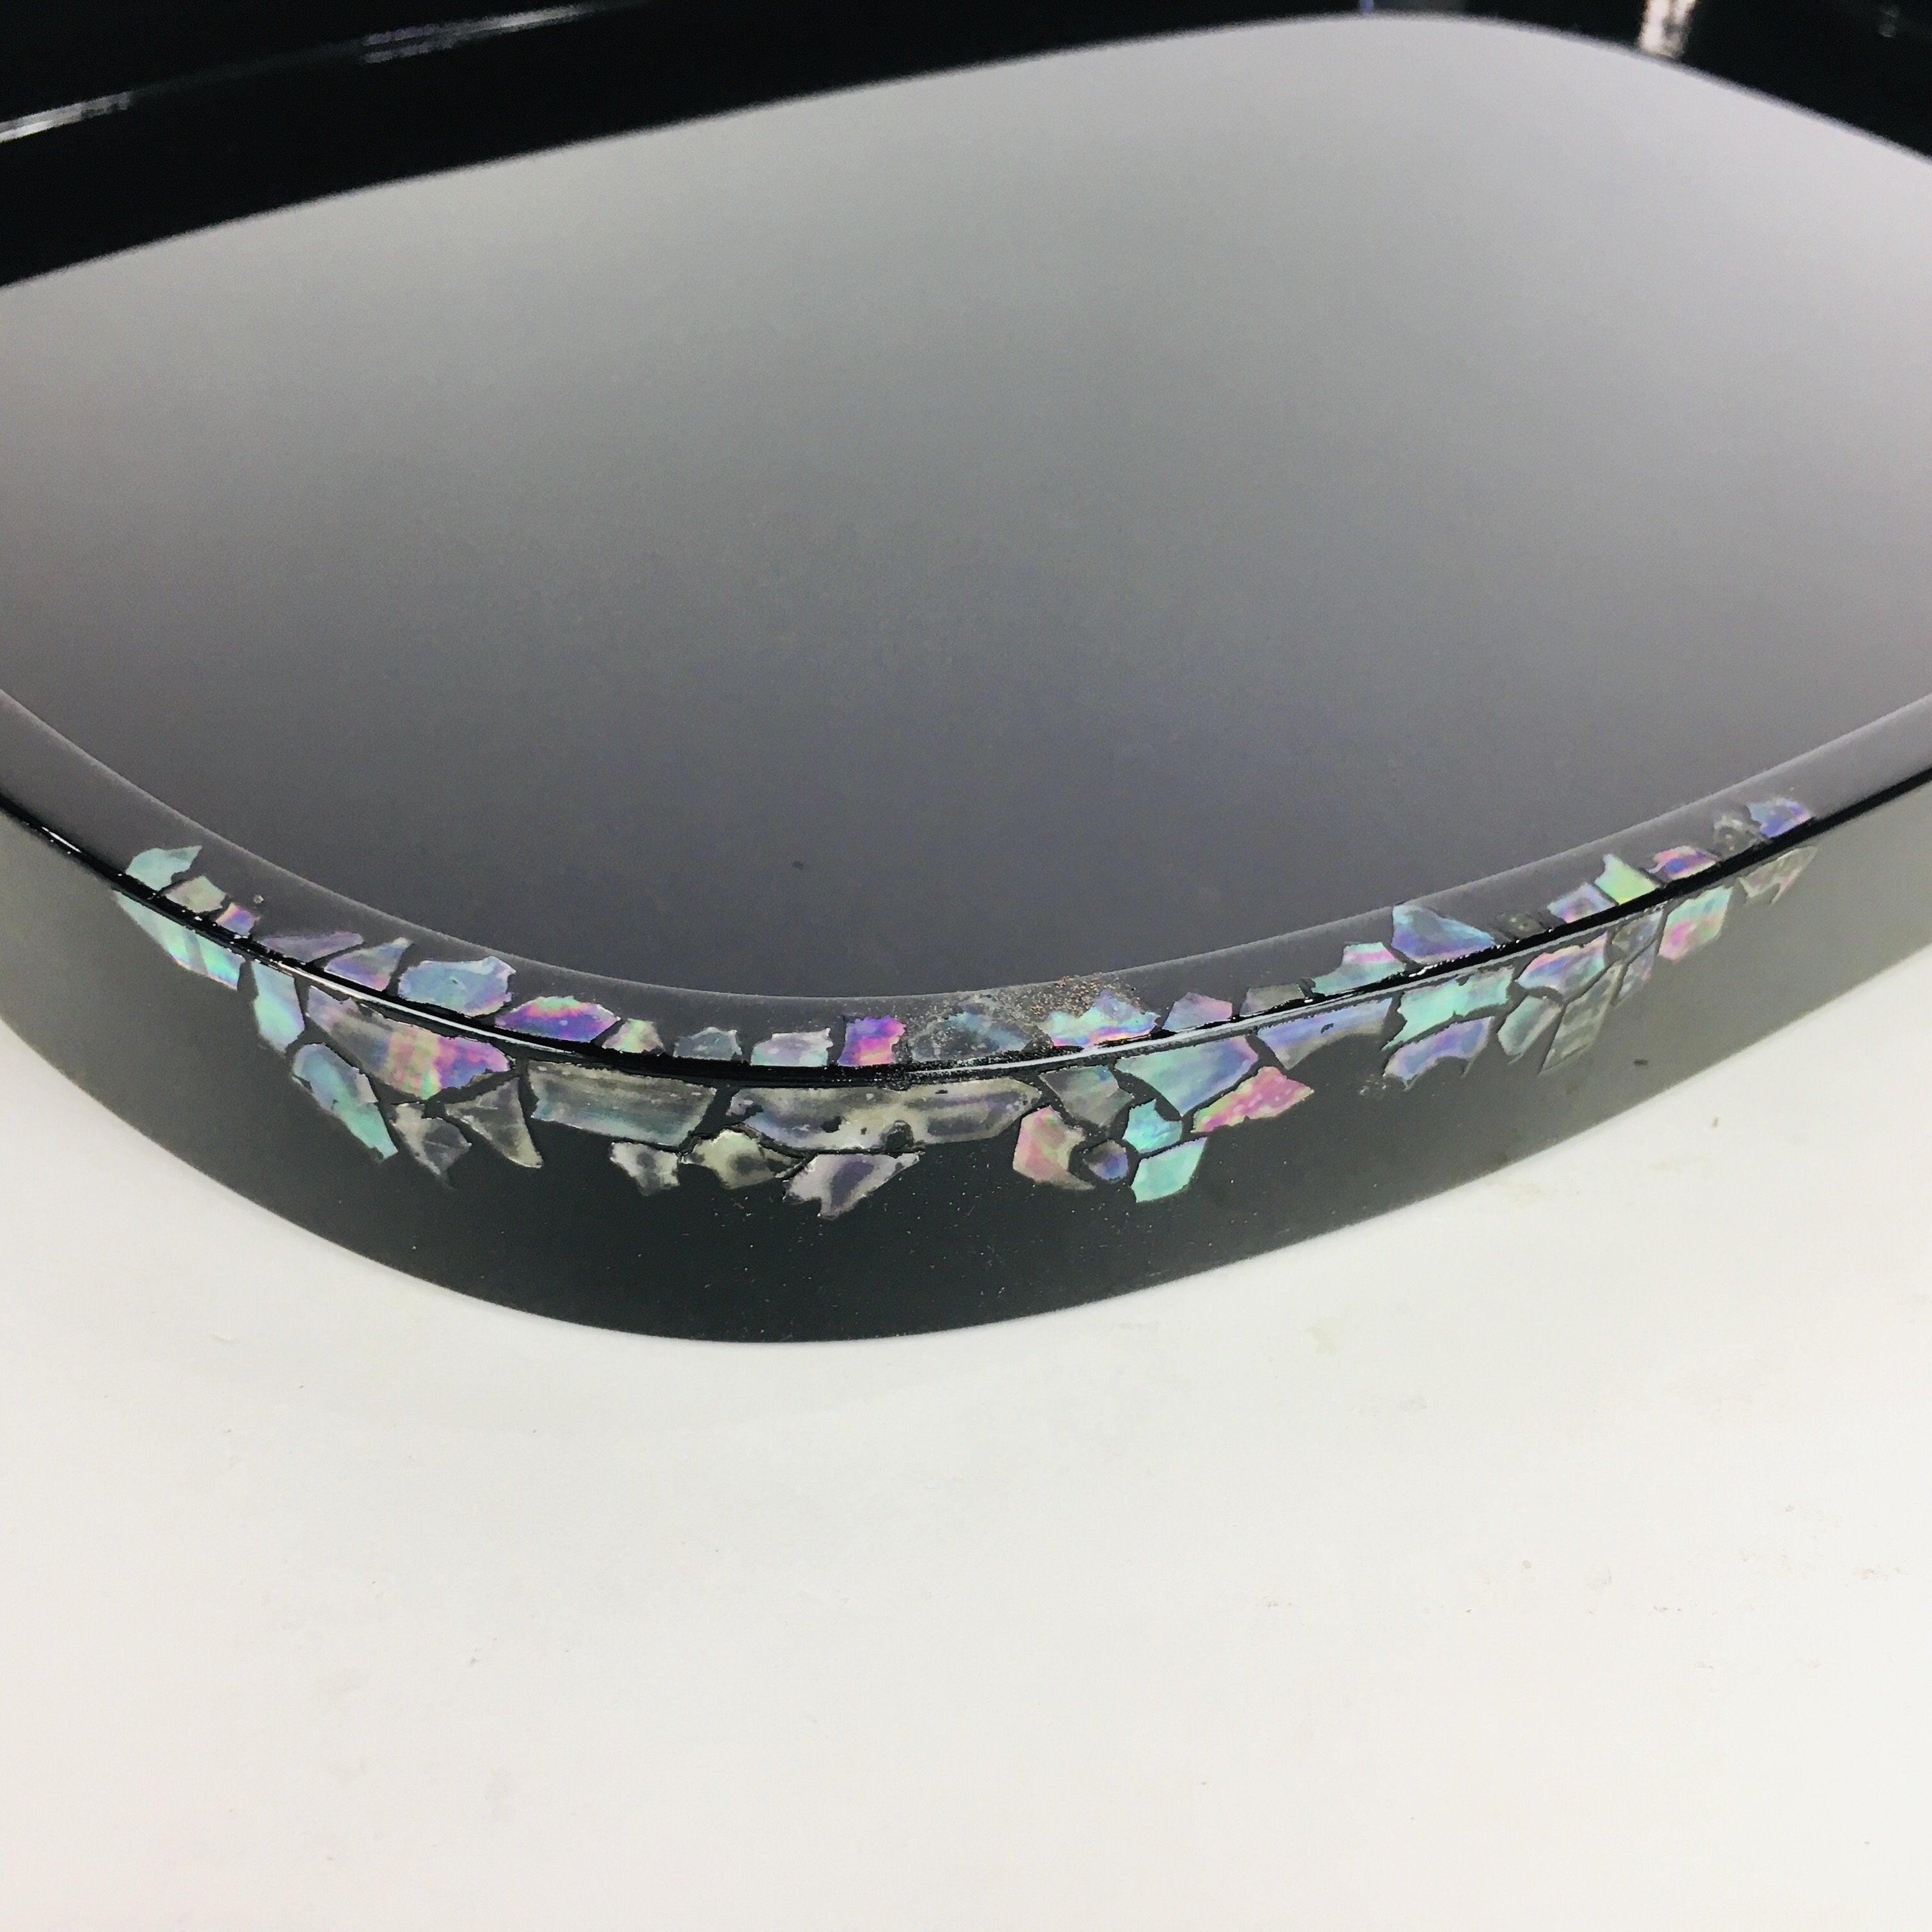 Japanese Wooden Lacquered Tray Obon Vtg Abalone Inlay Oval Shape Black UR509